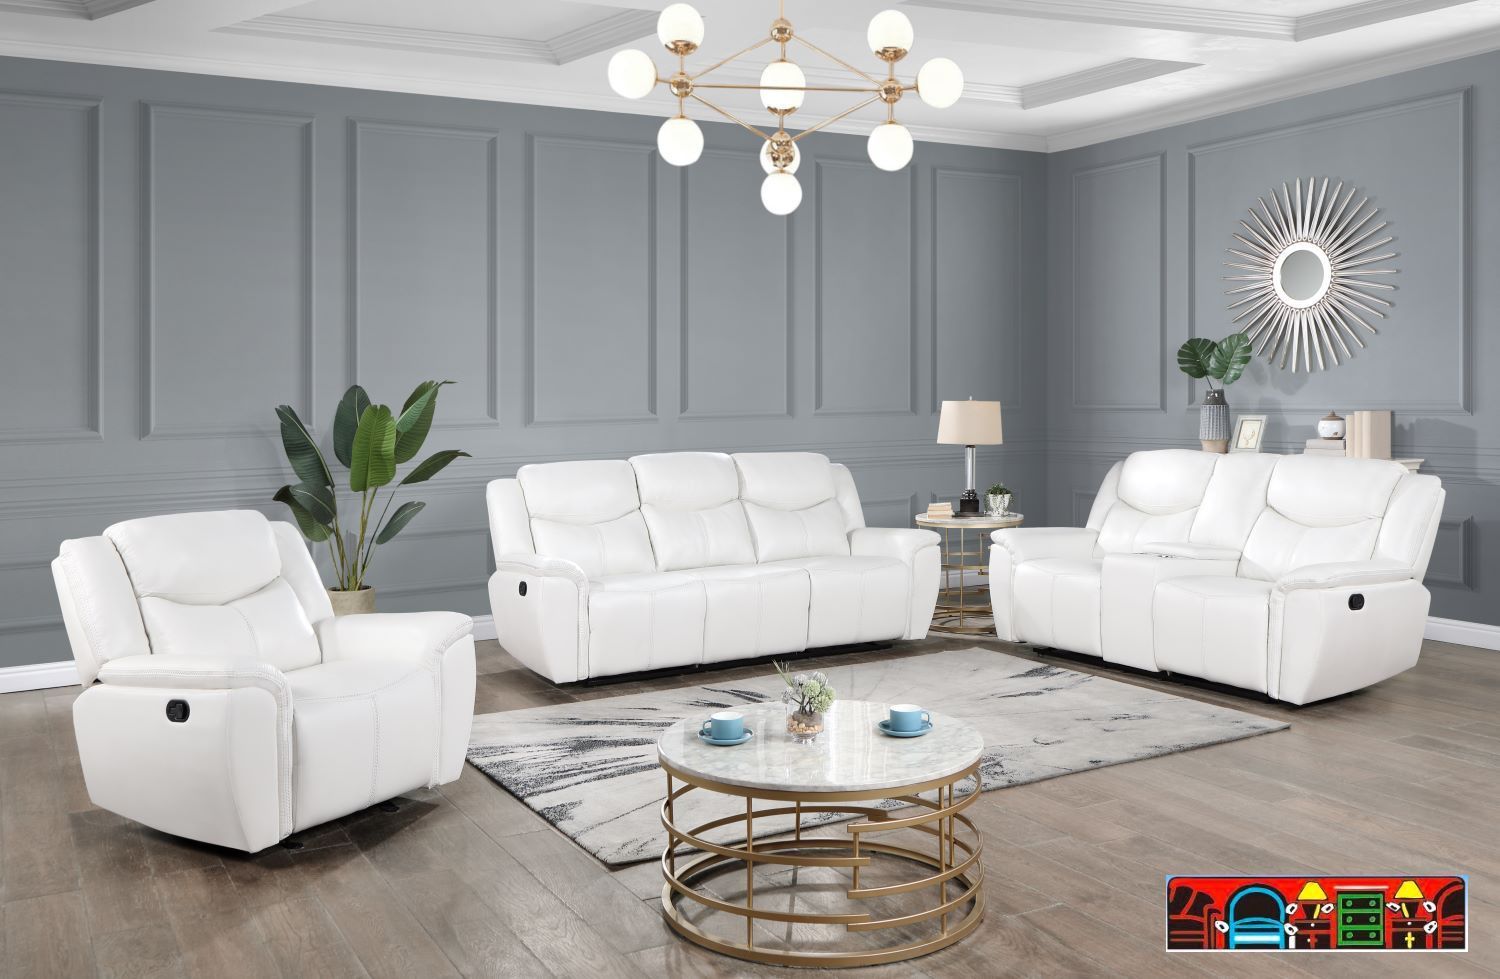 New Eric leather reclining sofa, loveseat, and rocker recliner in white.